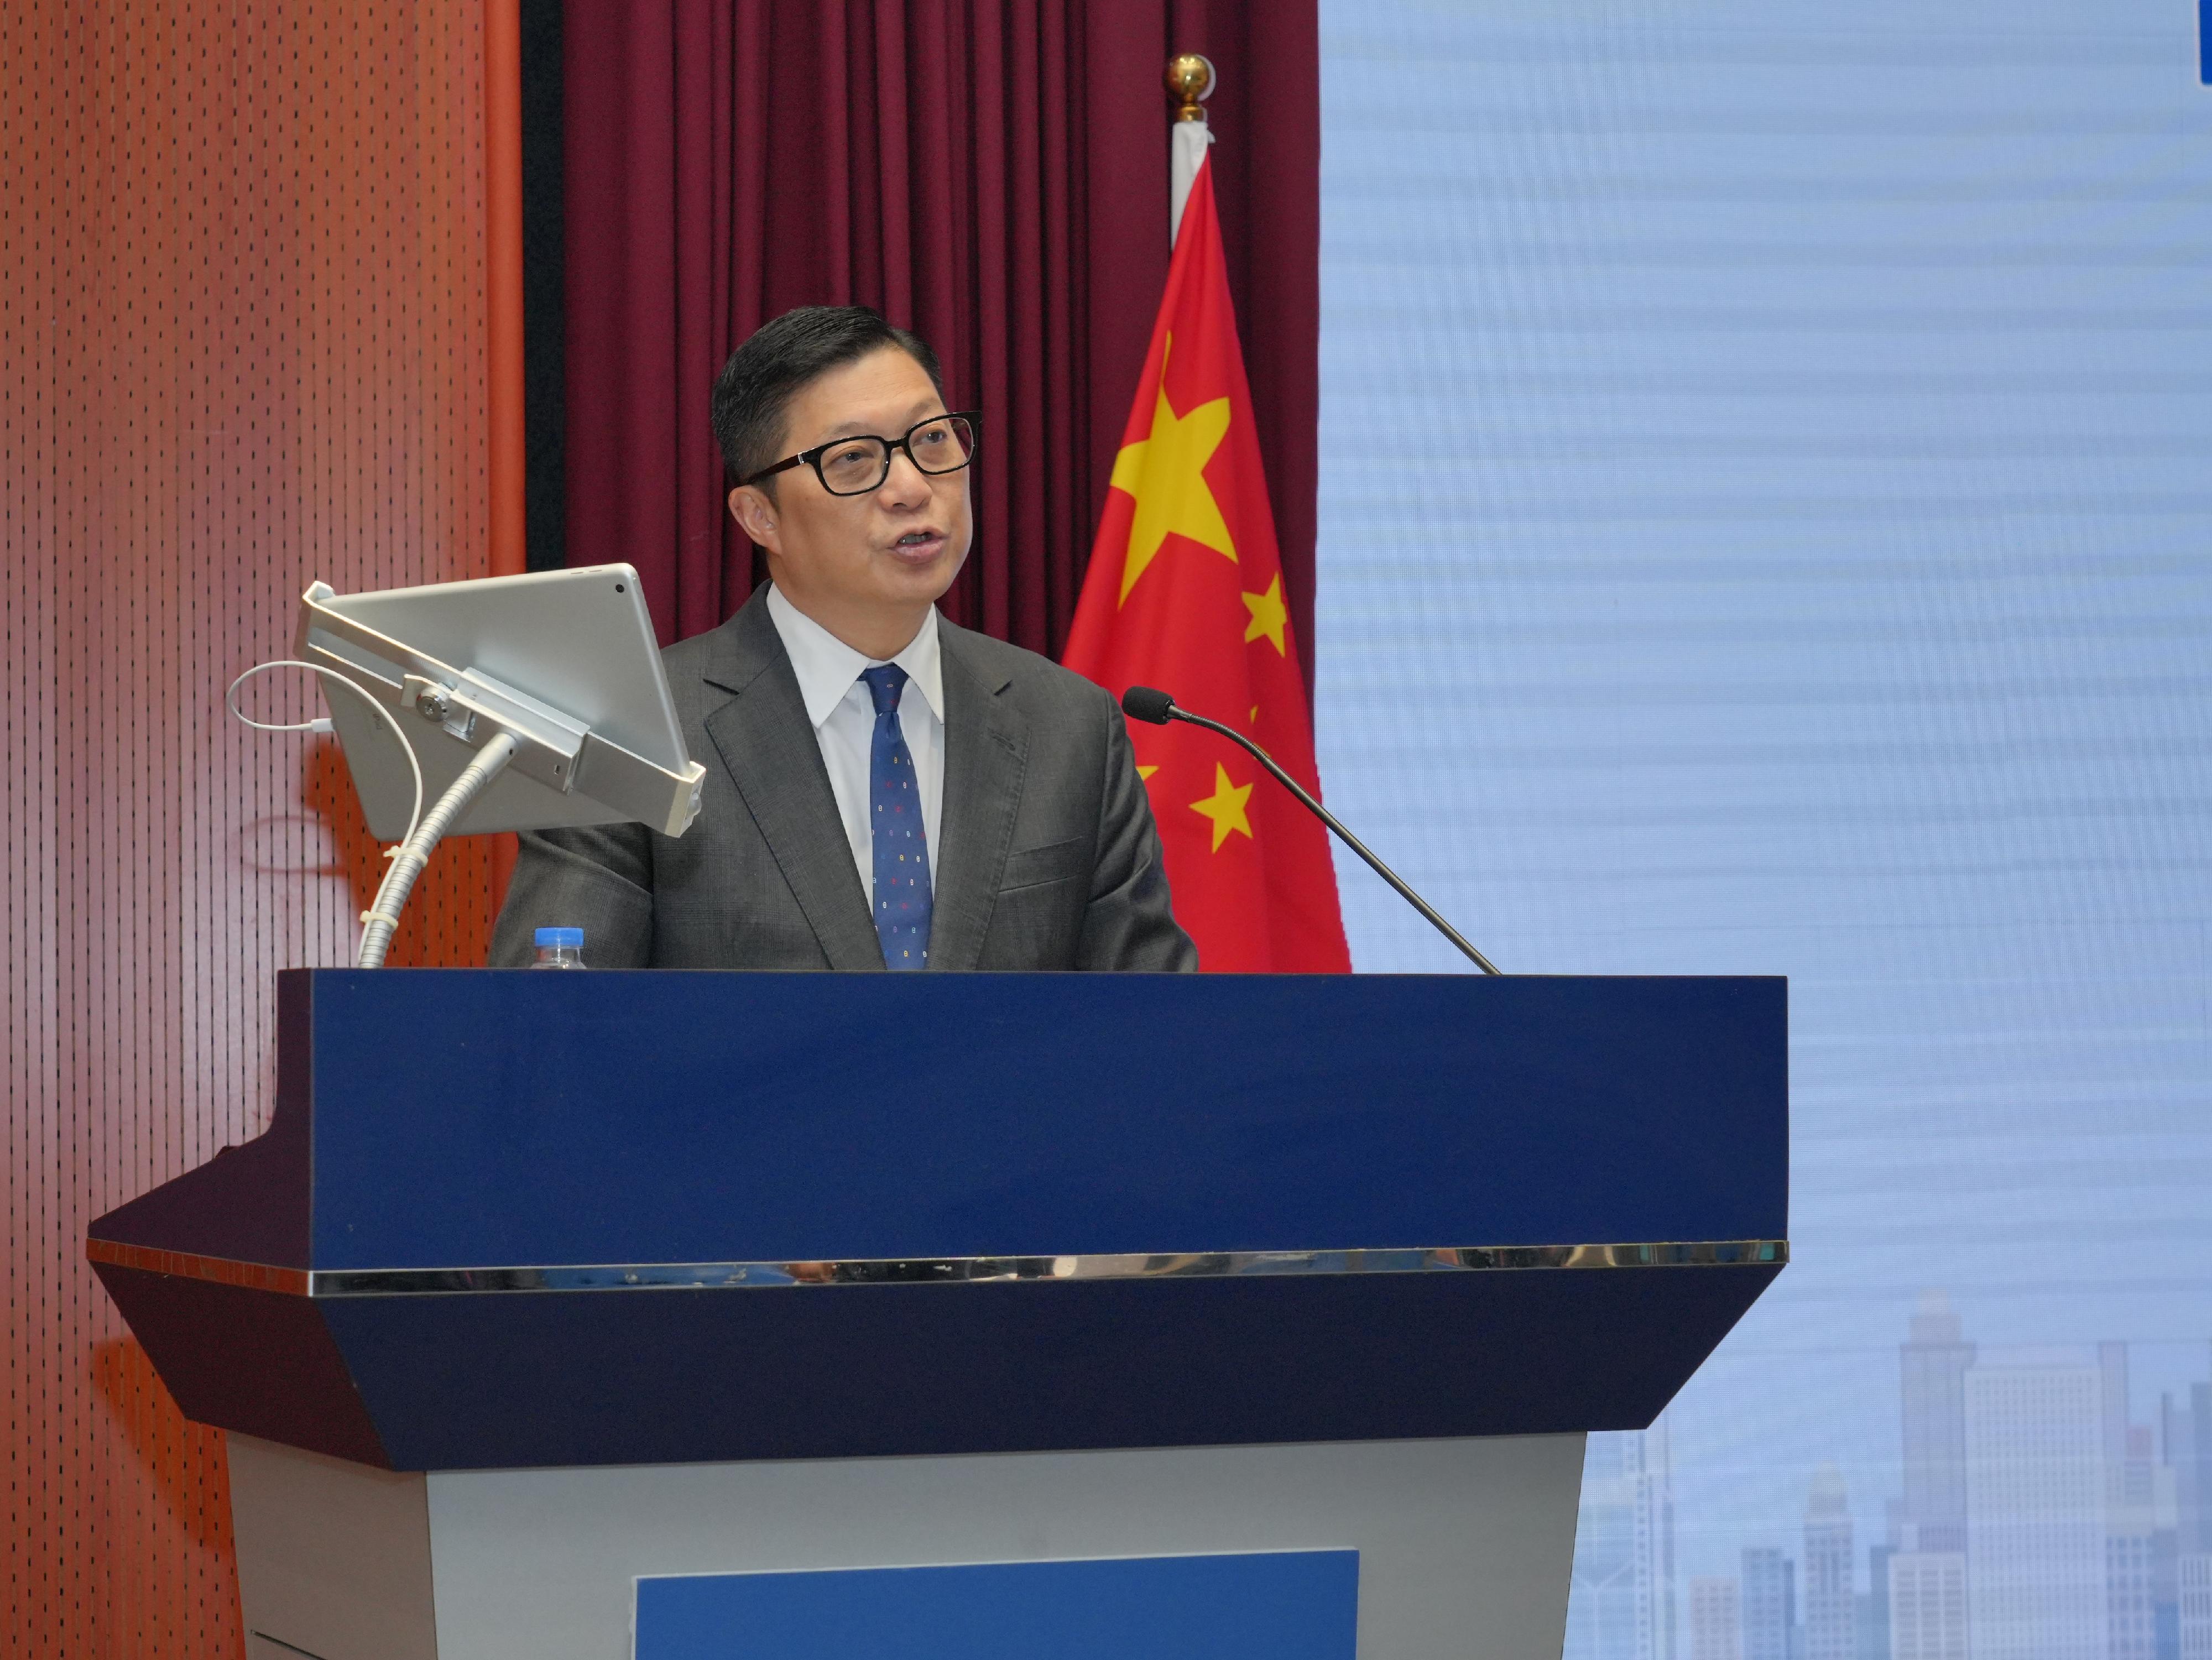 The Security Bureau and Shenzhen University signed a Memorandum of Understanding today (November 18) to jointly promote Hong Kong-Shenzhen youth development and co-operation on cultural exchanges. Photo shows the Secretary for Security, Mr Tang Ping-keung, delivering a speech at the signing ceremony.